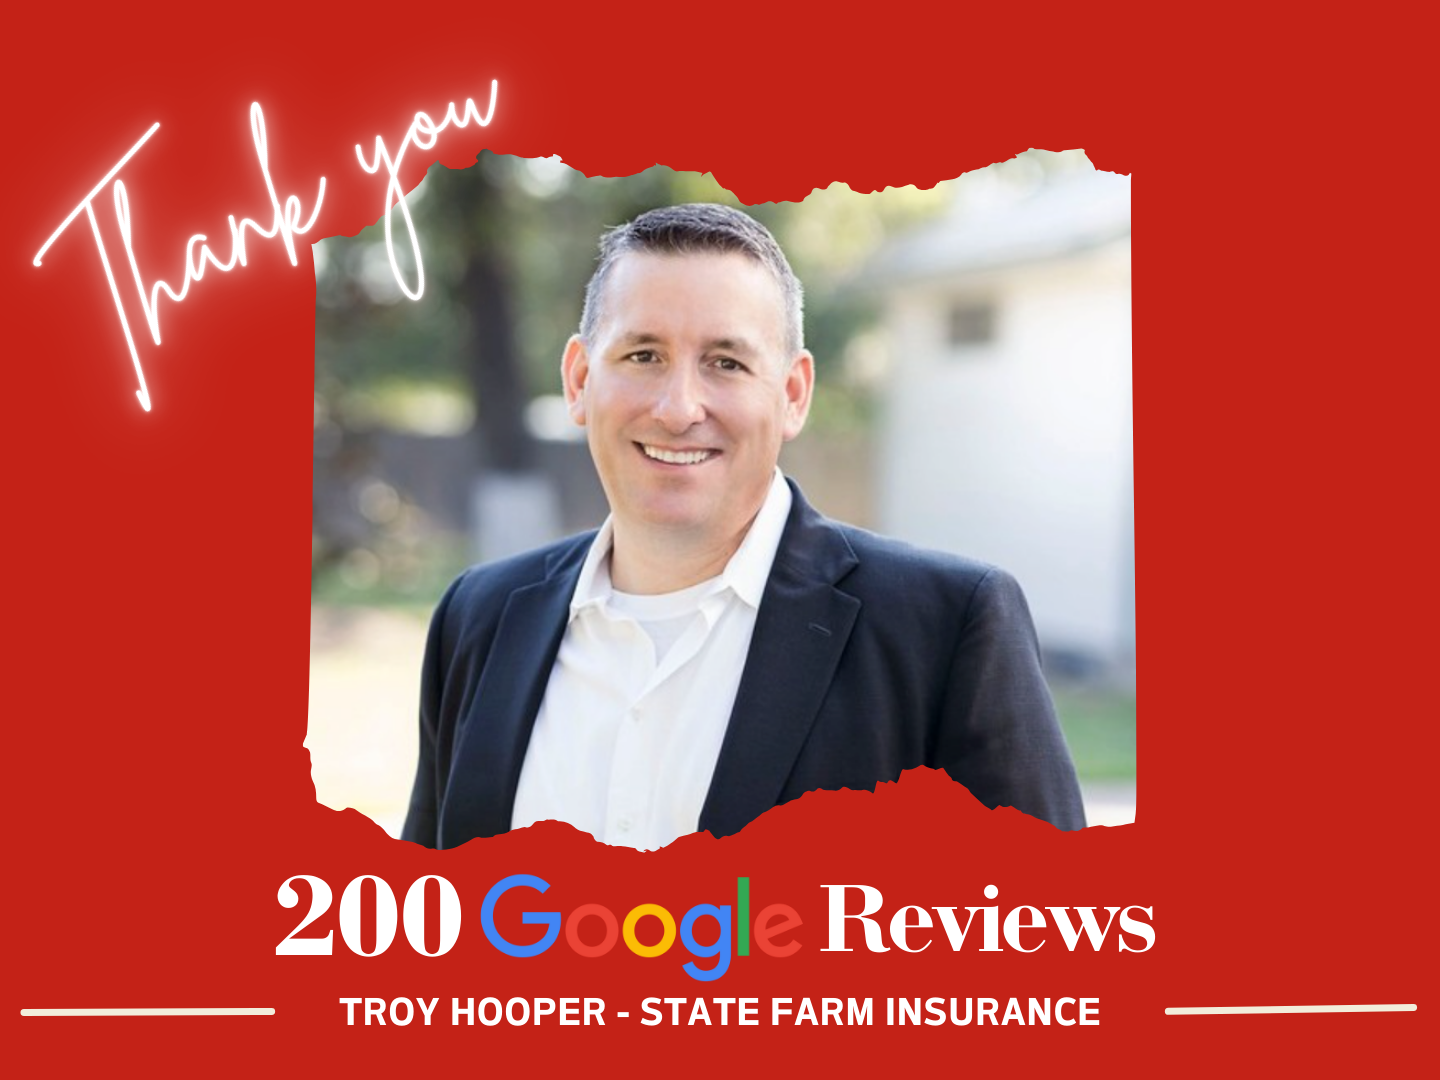 We want to say thank you to all who helped us reach 200 Google Reviews! Your feedback and testimonials motivate us to continue providing exceptional insurance services and personalized assistance in and around Cypress, Texas.